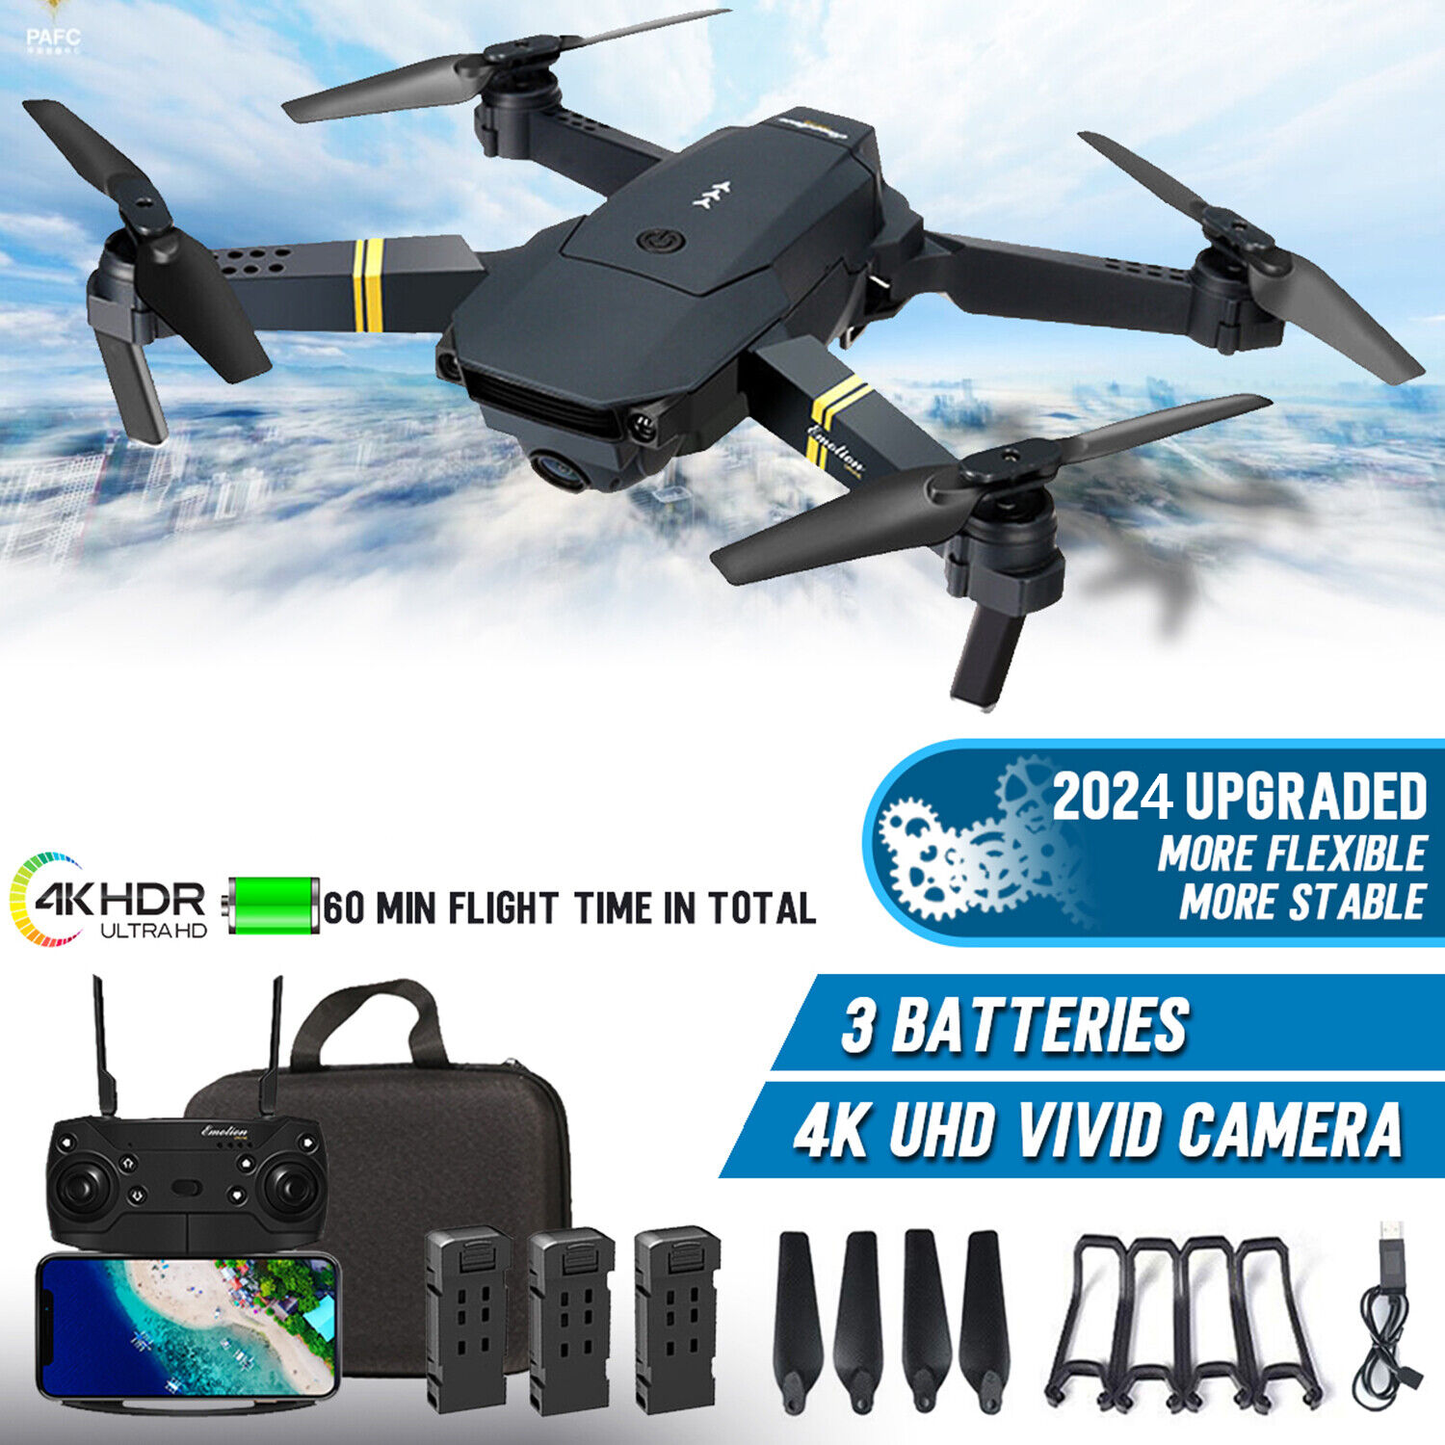 Pro Sky 5G Drone with UHD 4K Dual Camera + 3x Batteries Kit